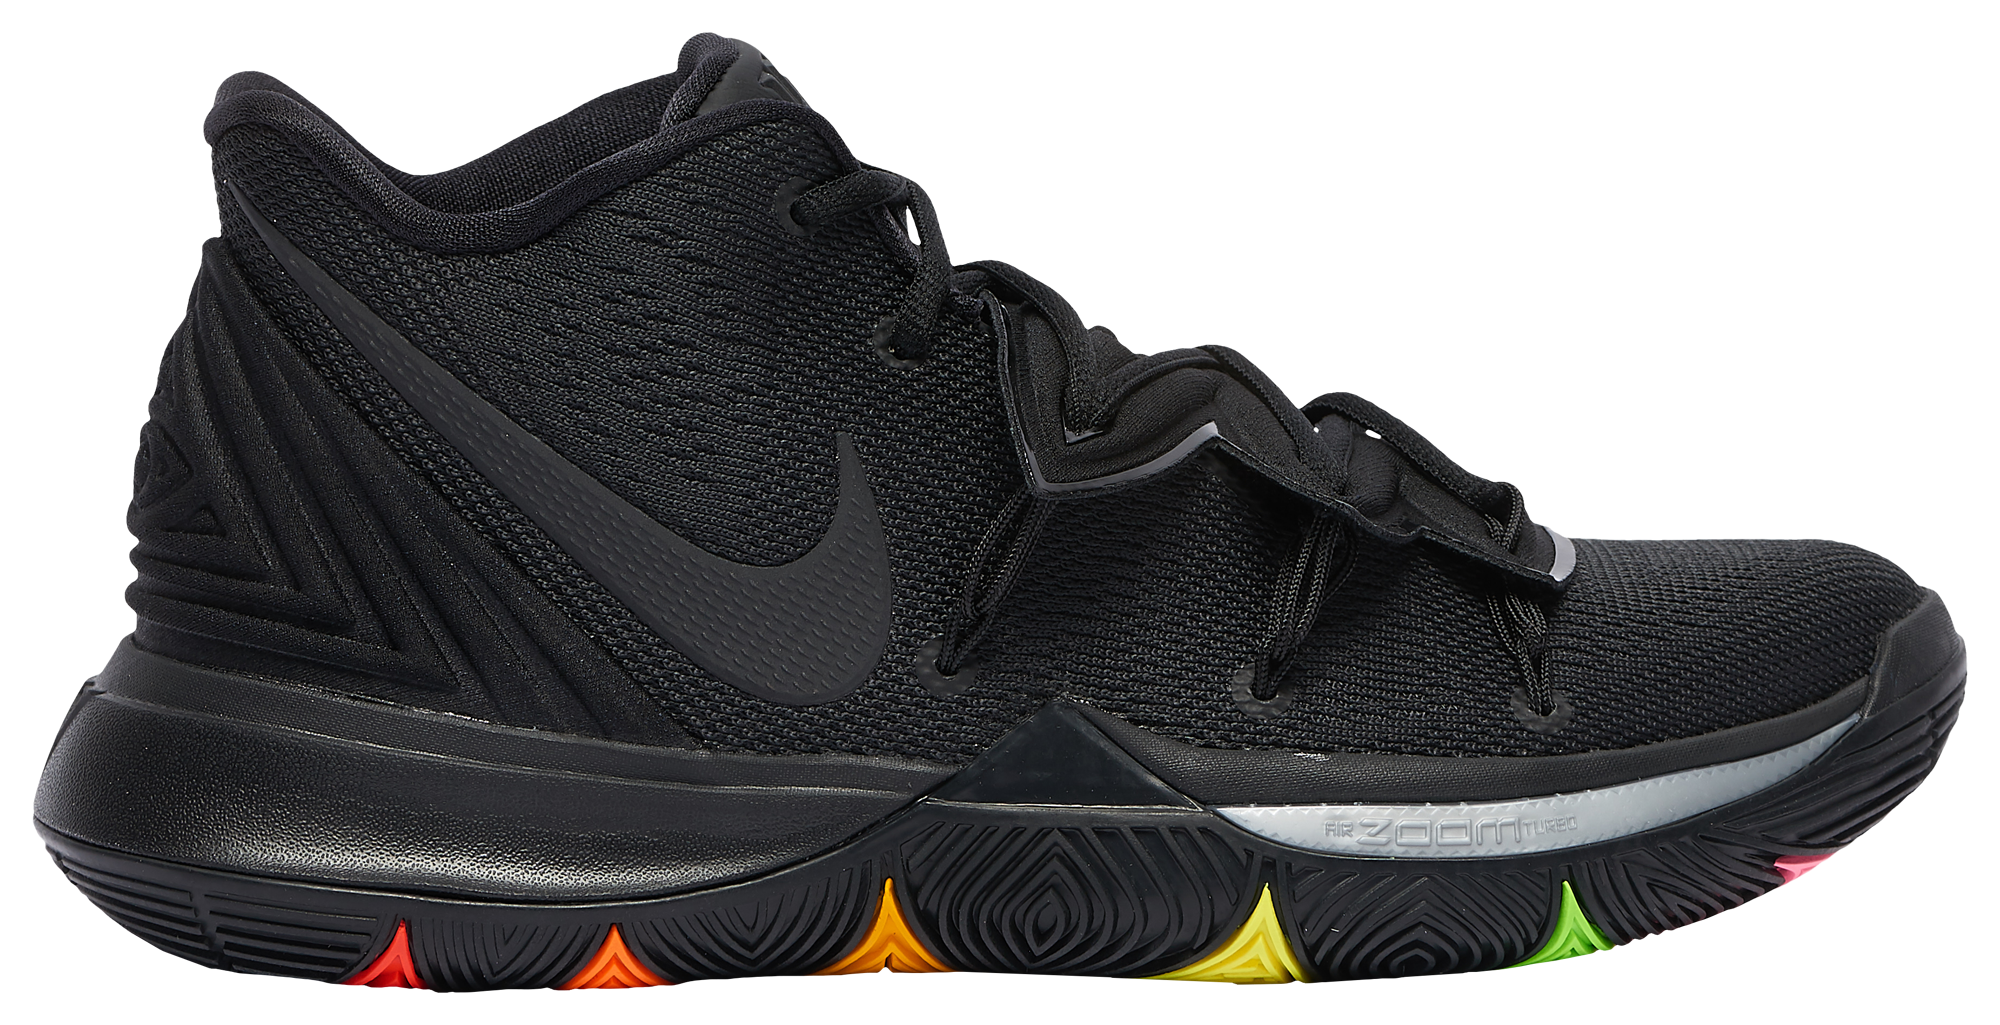 Kyrie 5 BHM Big Kids 'Basketball Shoe size 3.5 youth for Sale in